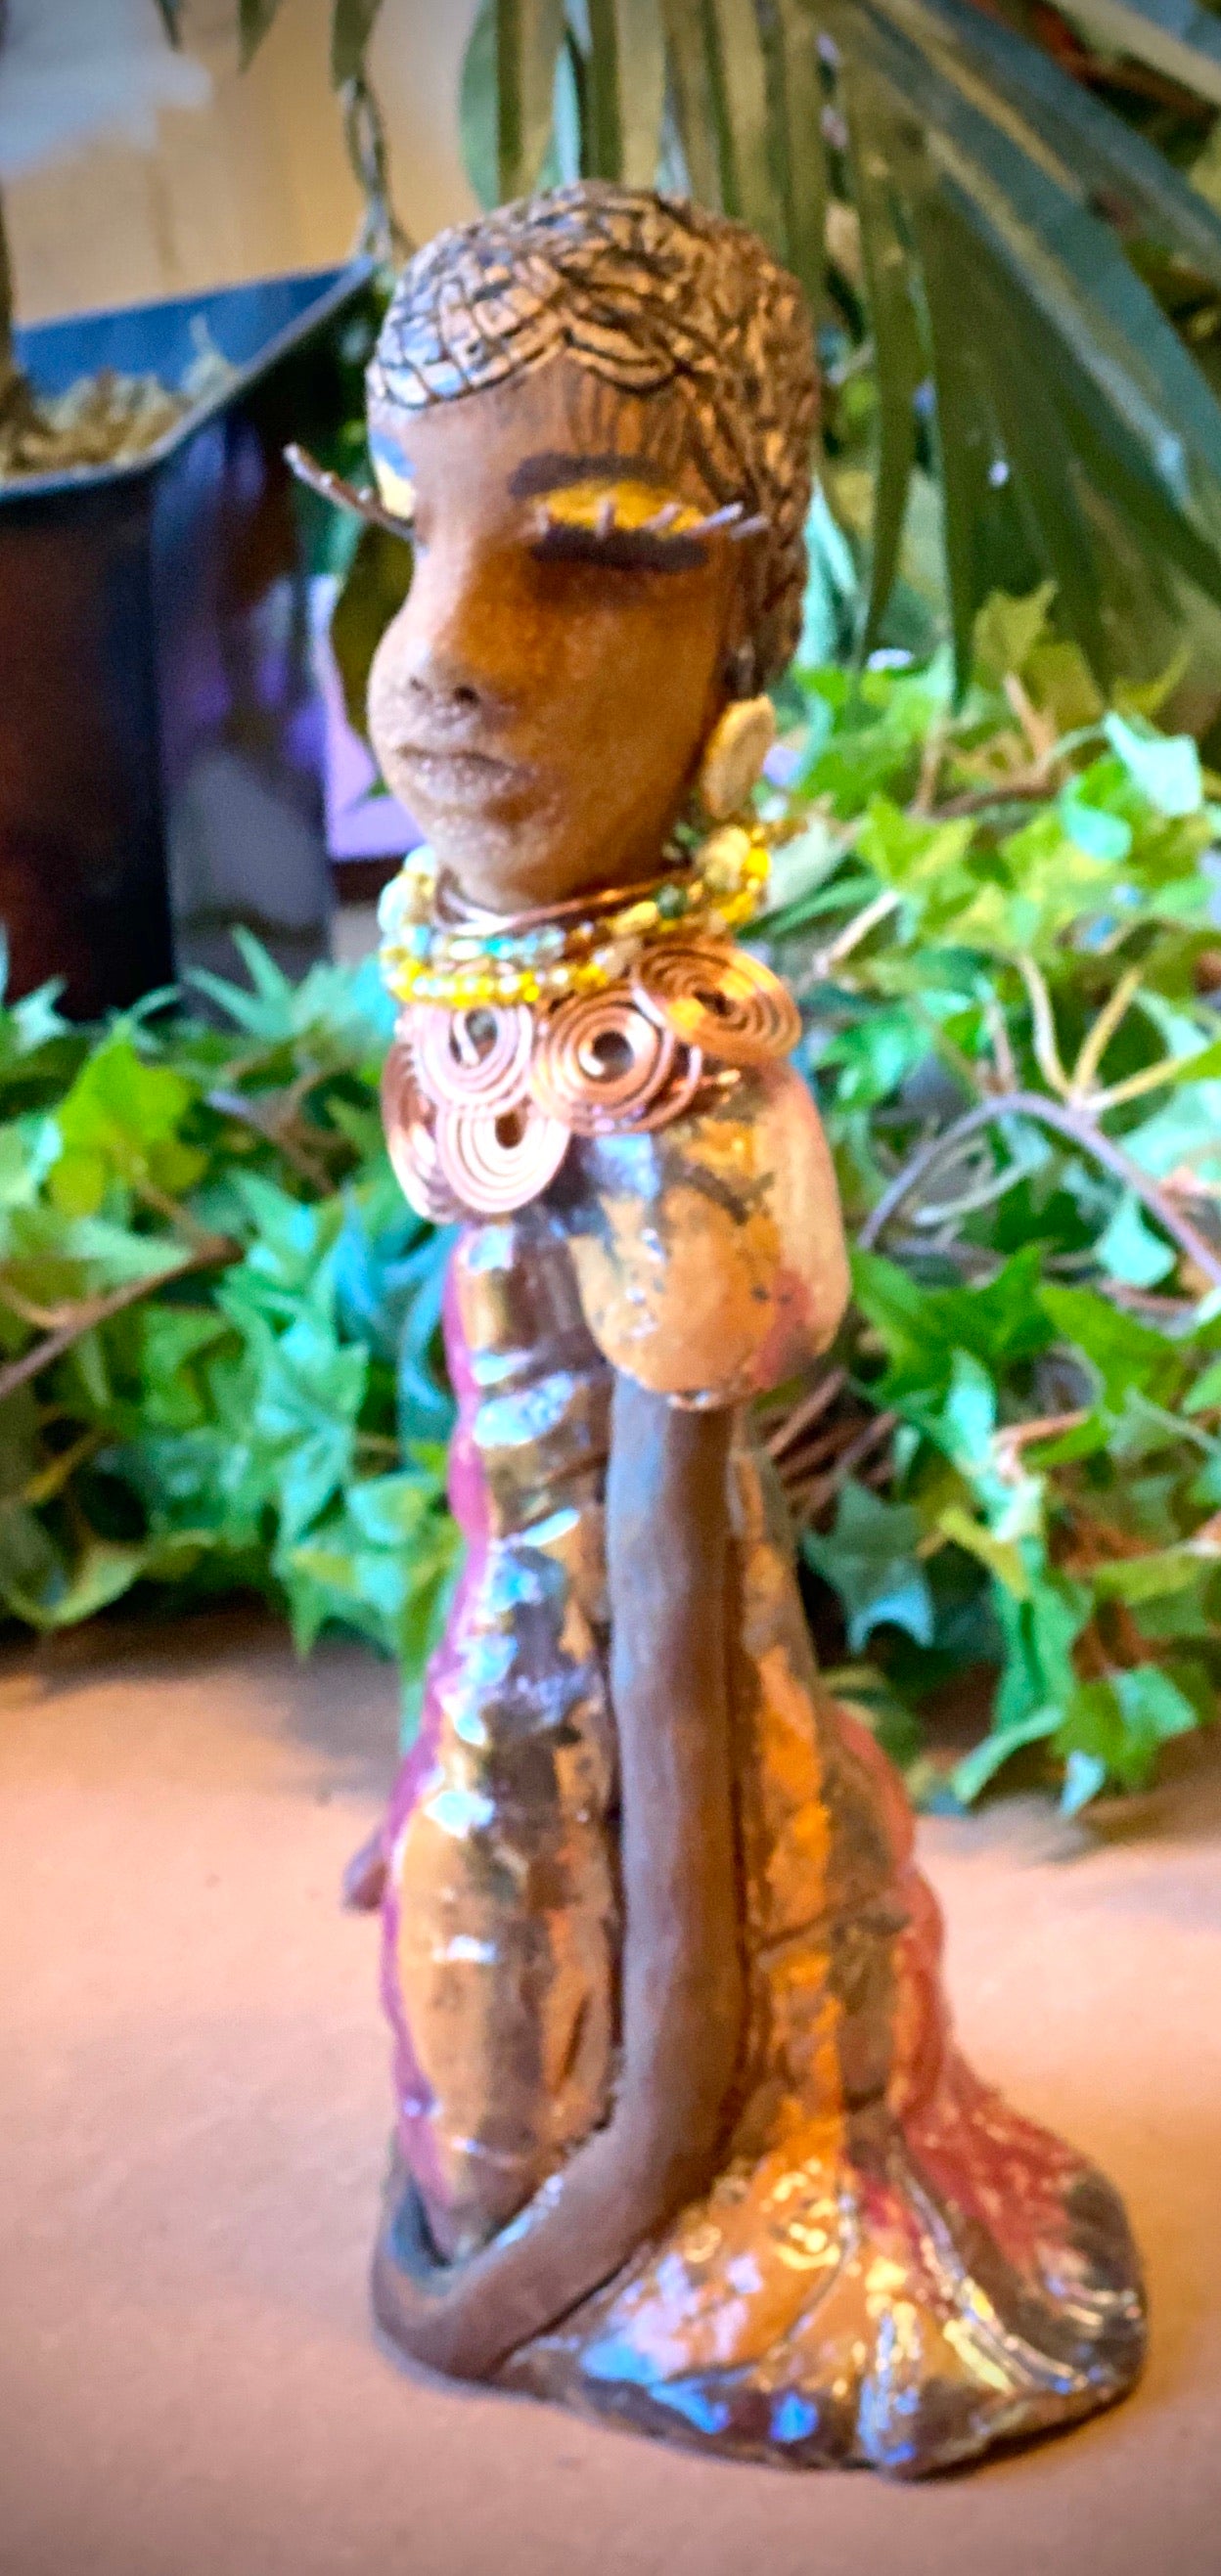 Keeba  long loving arms rest beside her multicolored metallic dress. She wears a spiral copper necklace. Keeba  is a sophisticated lady that will grace your home.